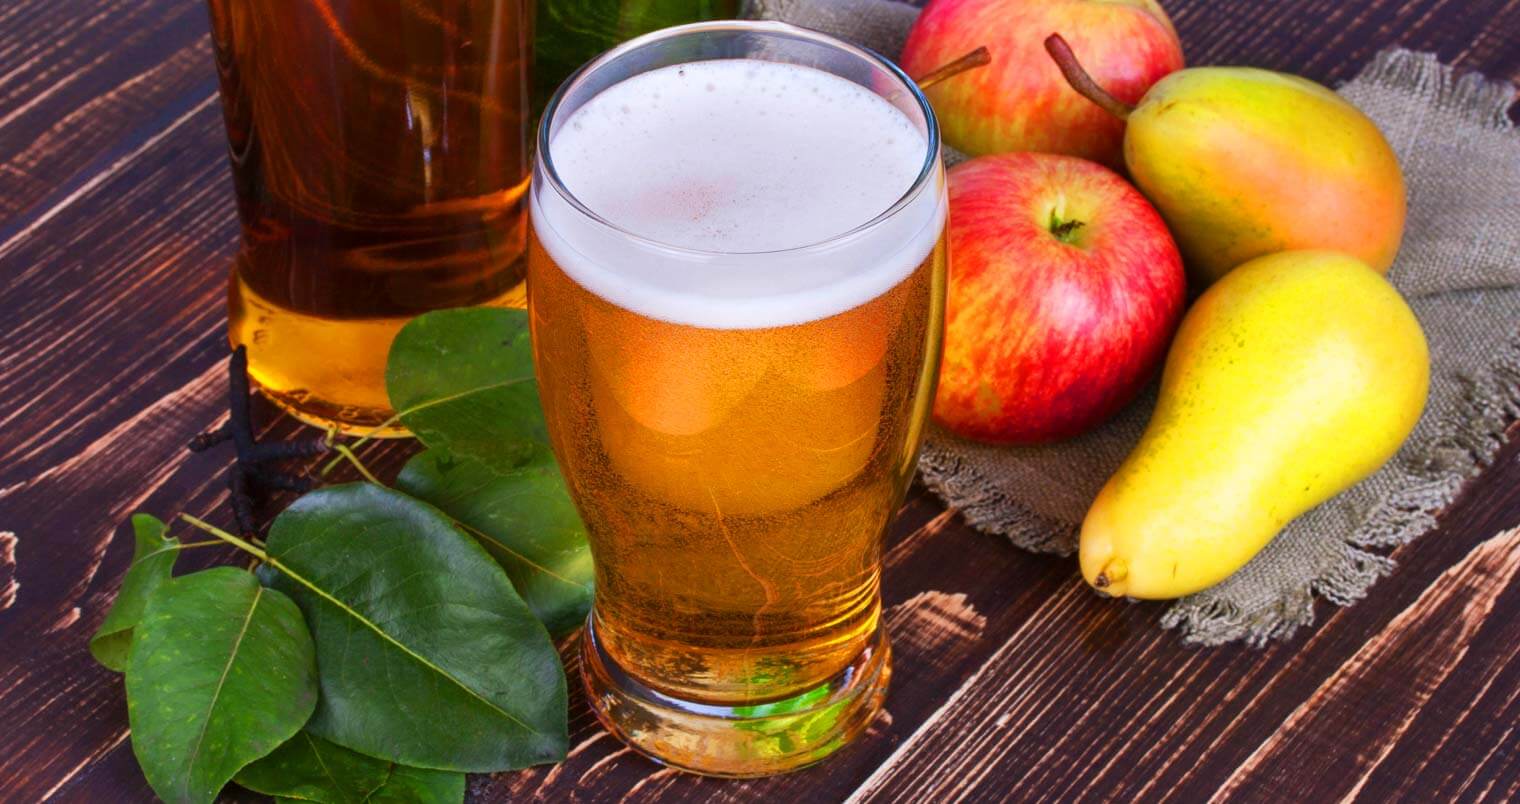 It's Cider Time - Bring on the Cold Weather with These 6 Ciders, glass, fruits